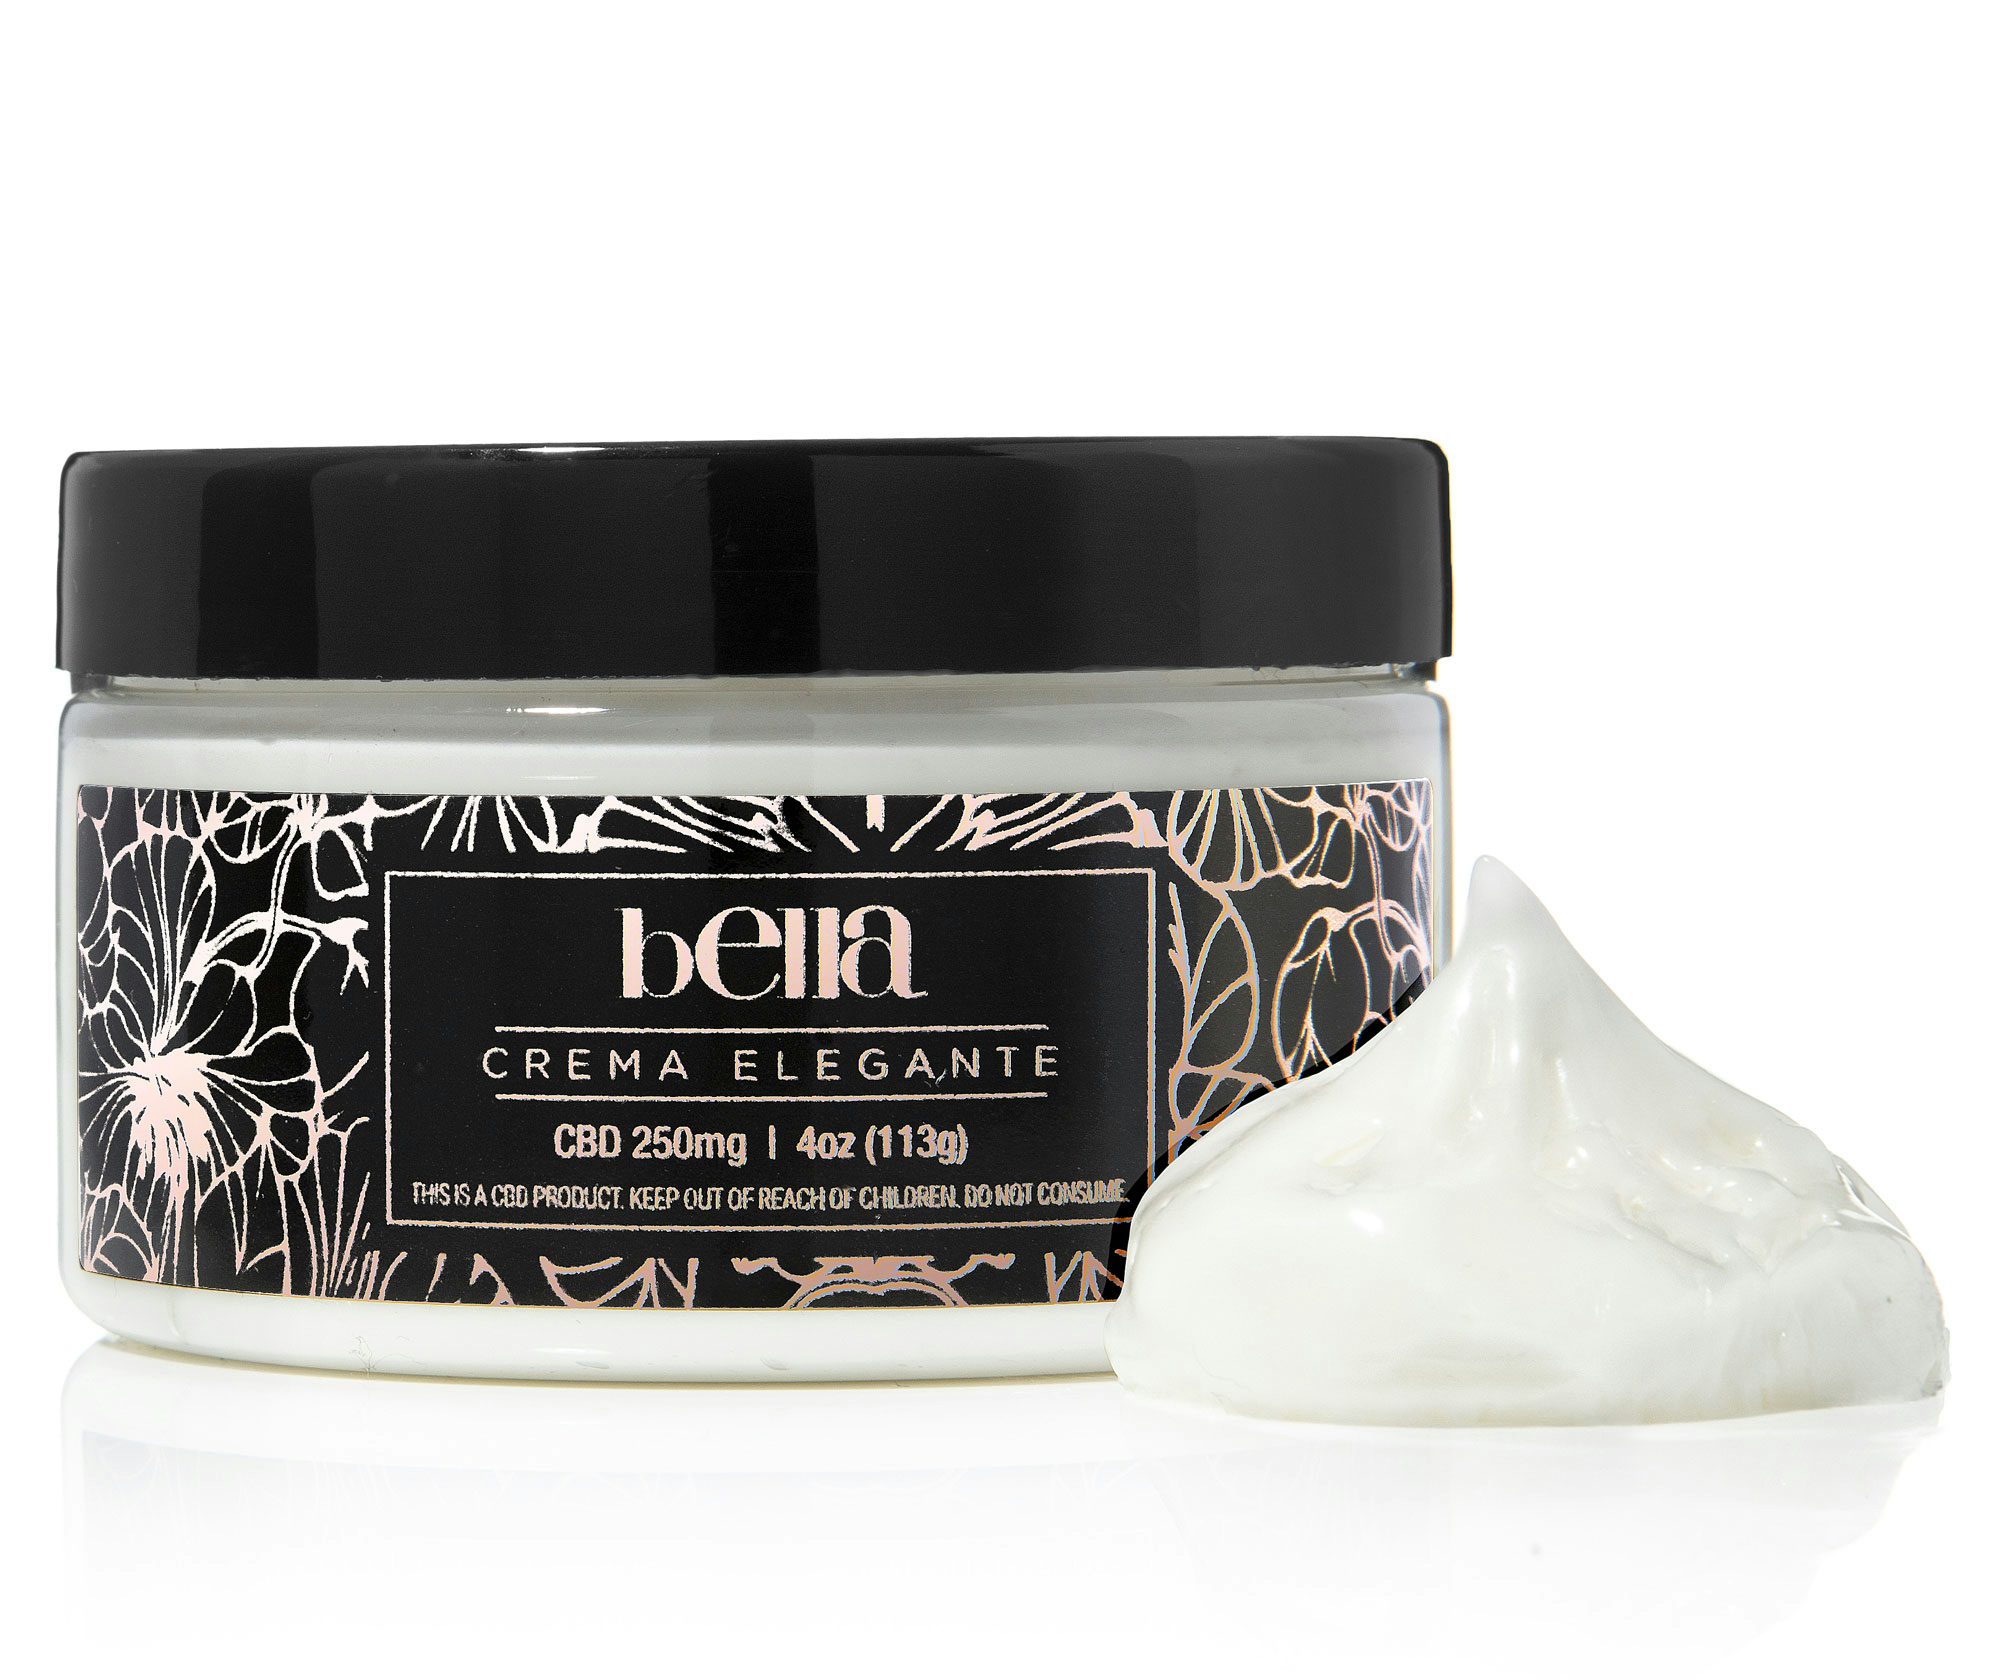 BellaCream CBD lotion and skincare products could help you manage eczema and psoriasis